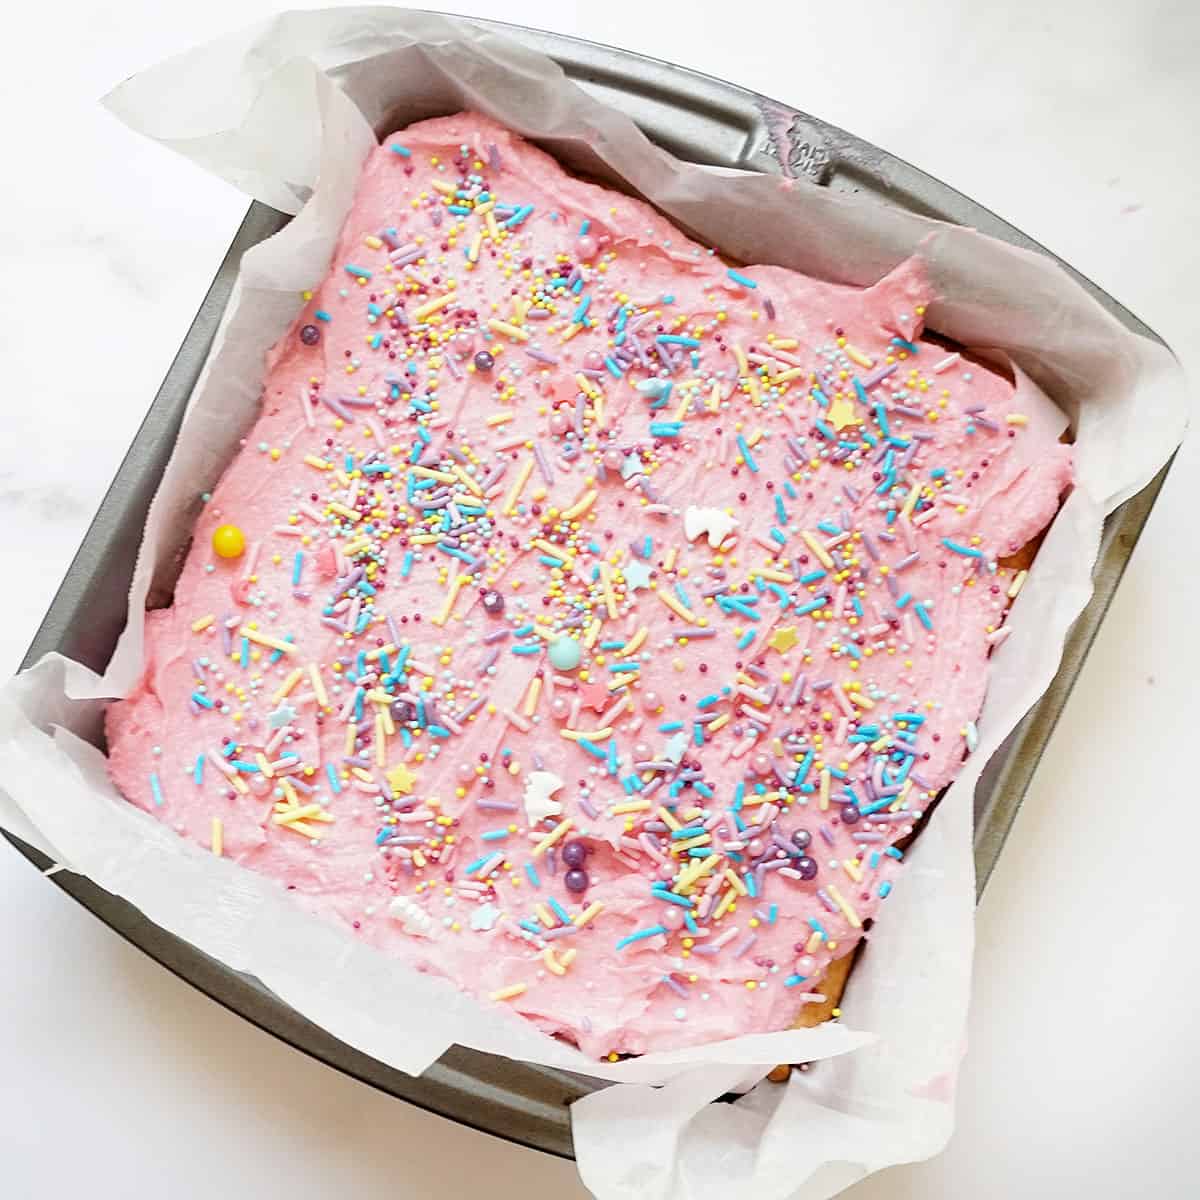 sugar cookie bars with pink frosting and sprinkles in baking pan